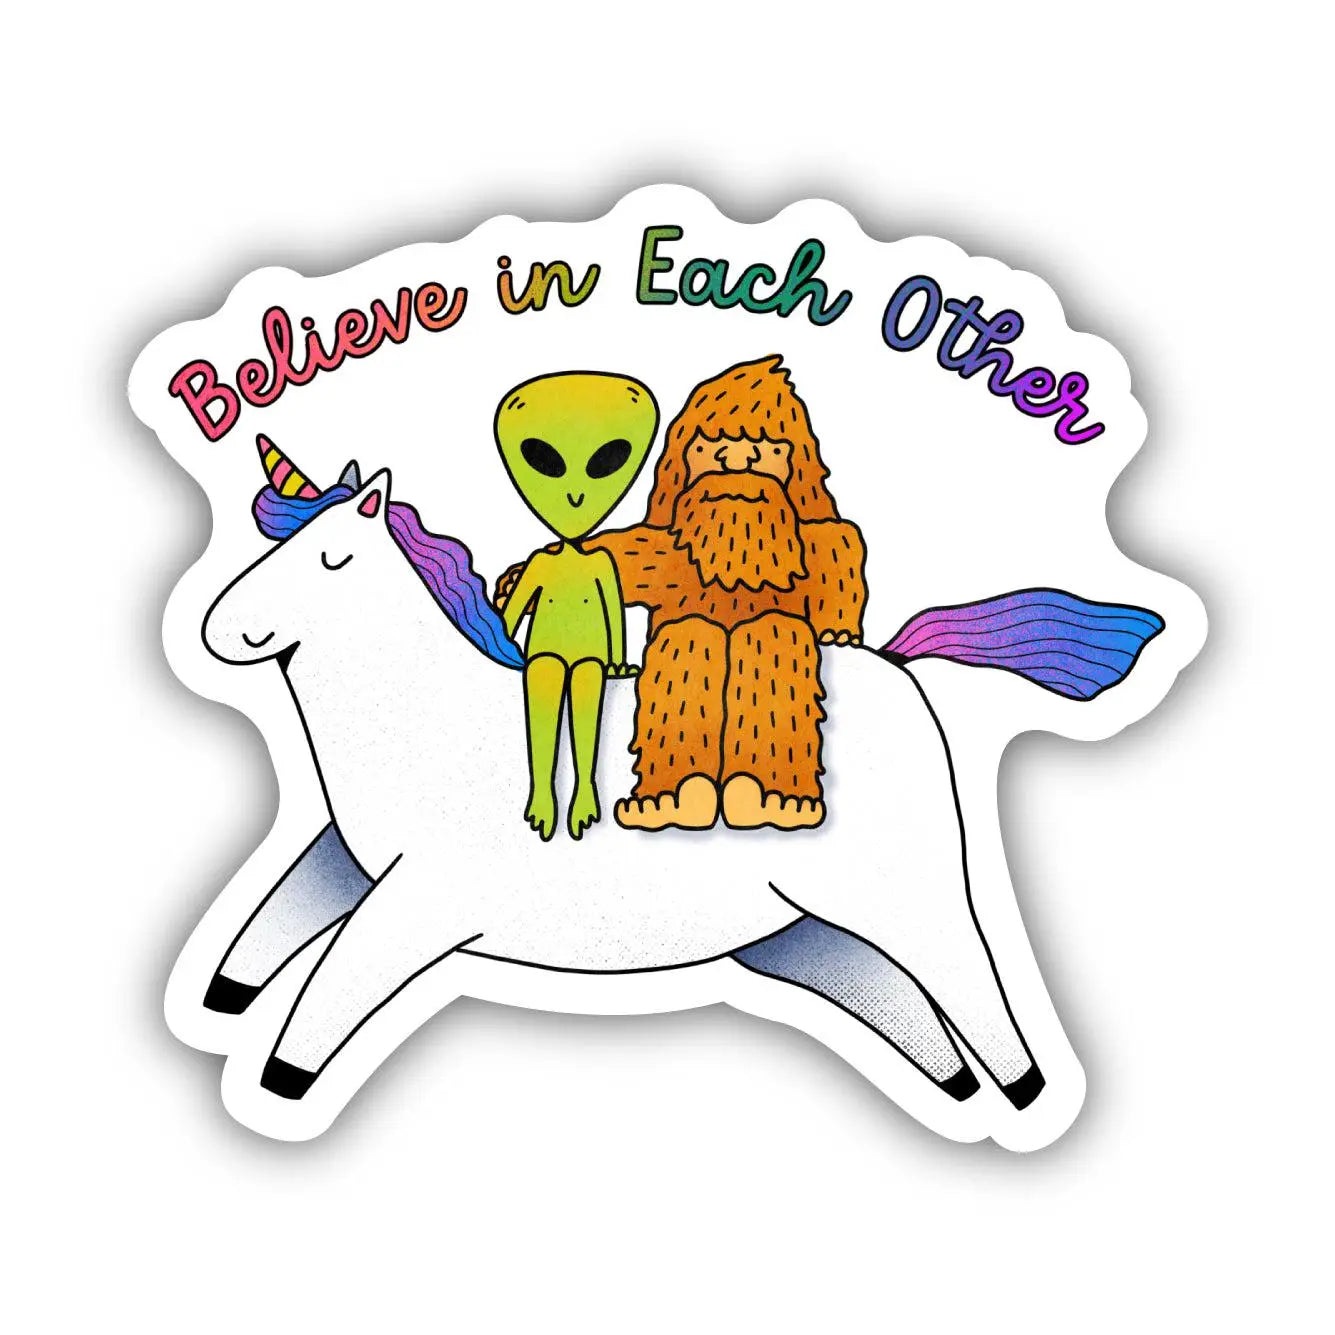 Big Moods 'Believe in Yourself' Mythical Creatures Sticker